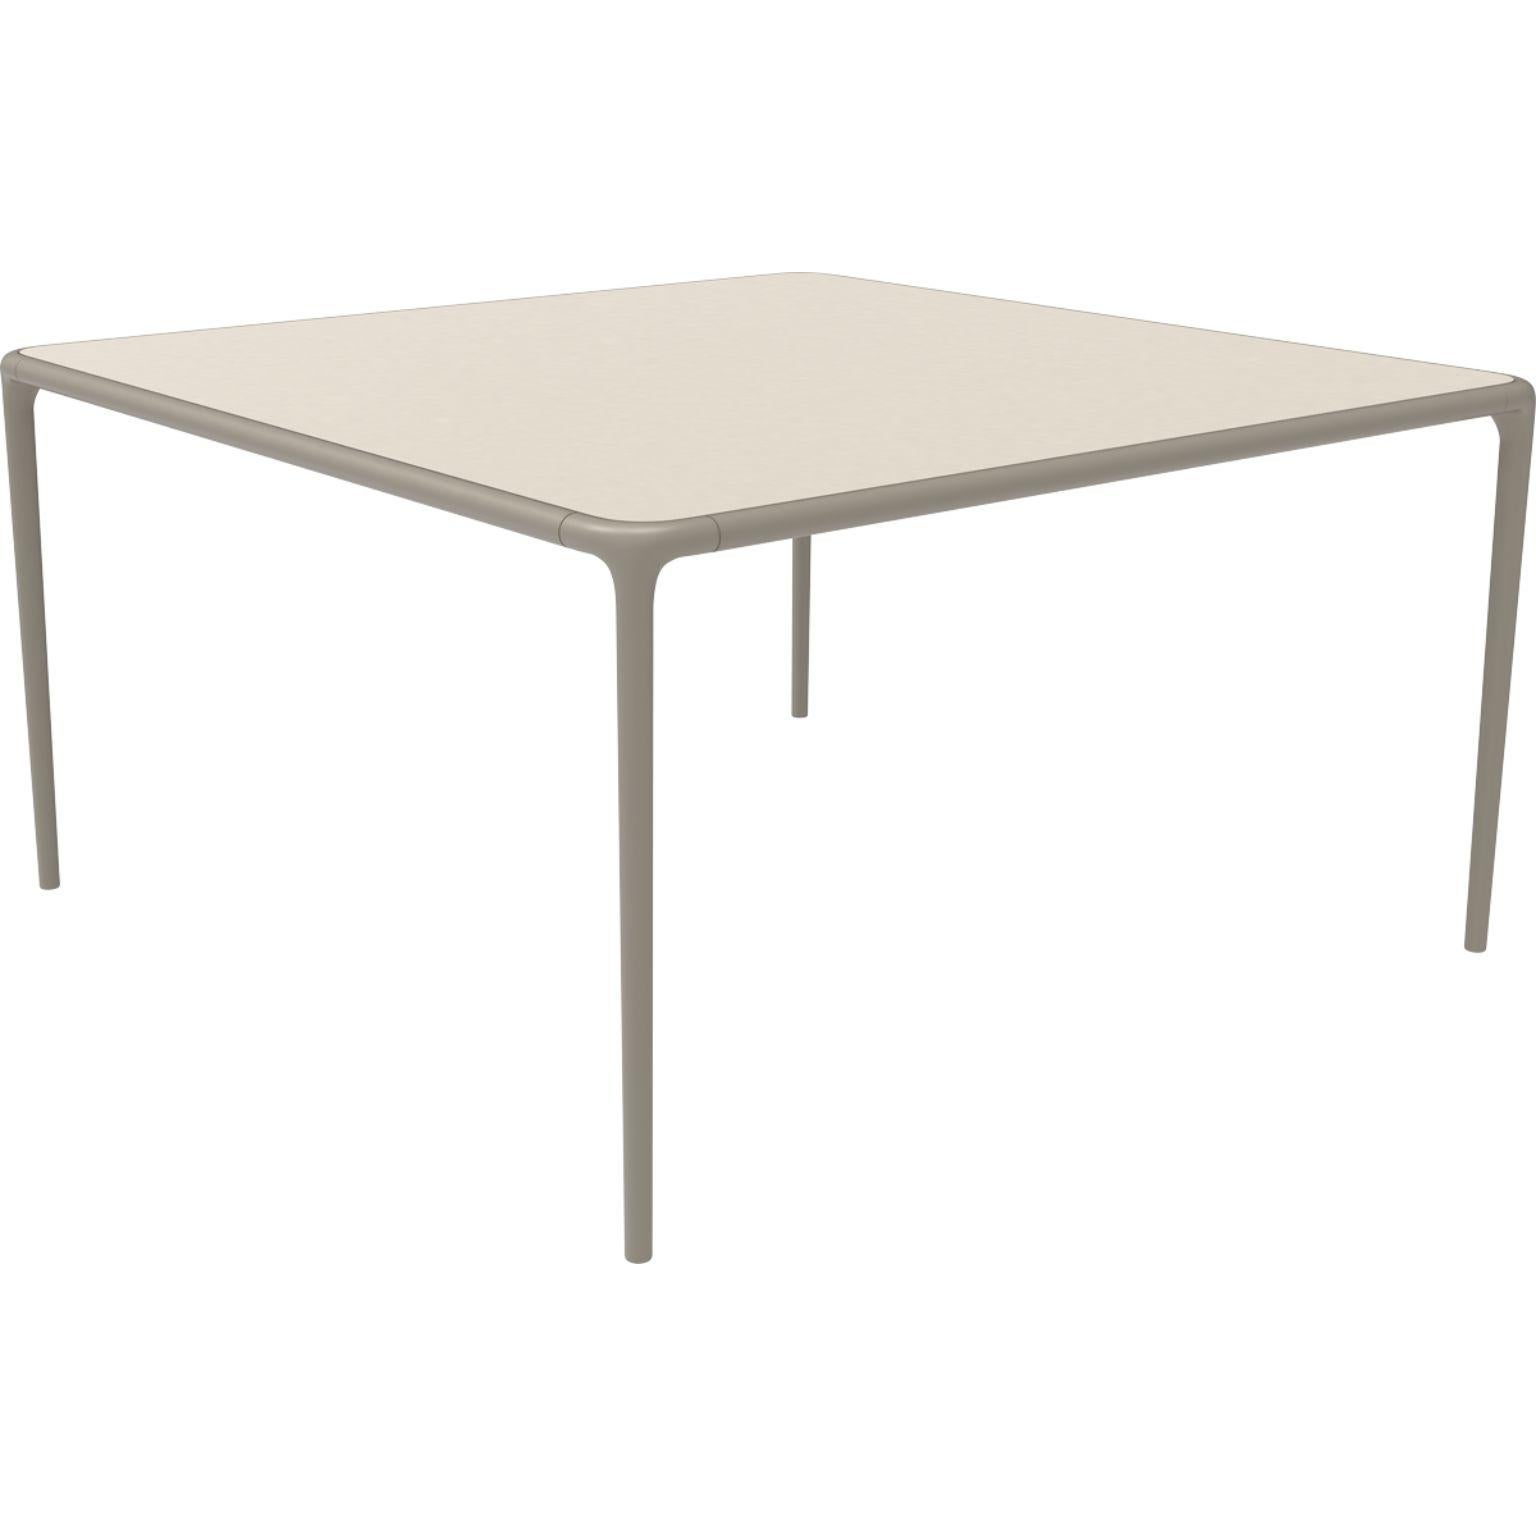 Xaloc cream glass top table 140 by Mowee
Dimensions: D 140 x W 140 x H 74 cm
Material: Aluminum, tinted tempered glass top.
Also available in different aluminum colors and finishes (HPL Black Edge or Neolith).

 Xaloc synthesizes the lines of